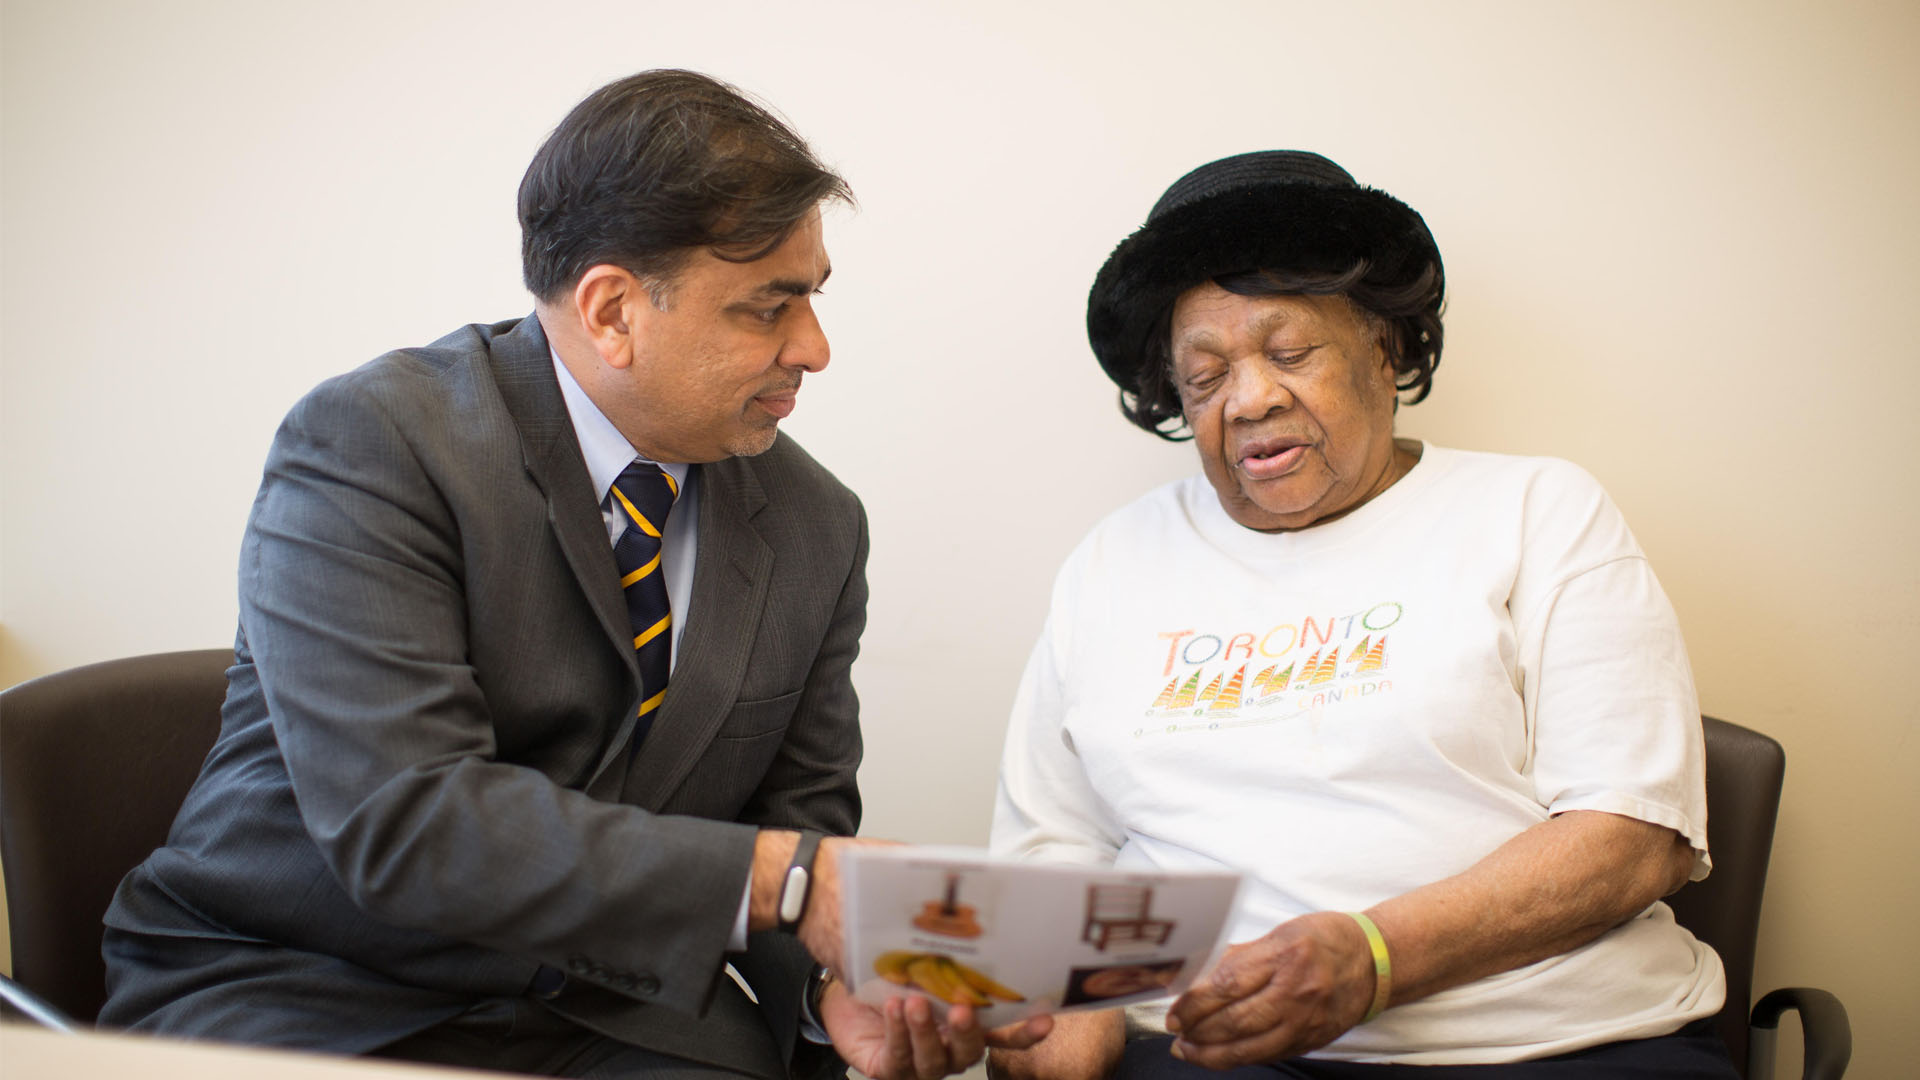 $11M NIH Grant Will Support Evaluation of Alzheimer’s Screening Tool in Primary Care Settings